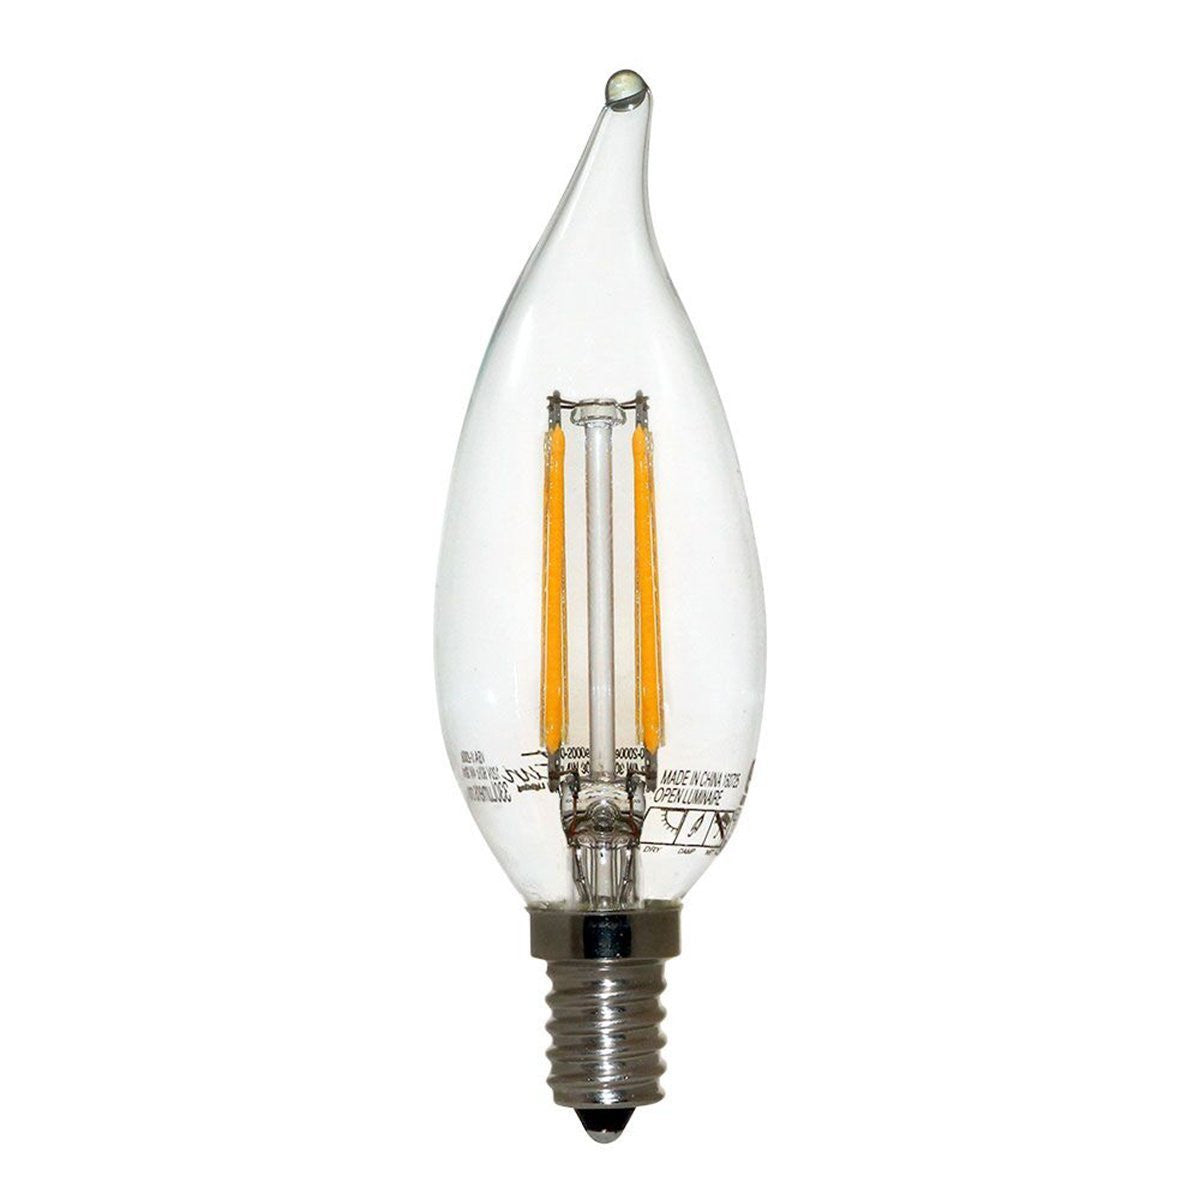 Filament Style Candelabra LED Bulb 40 Watt Equivalent Dimmable by Euri